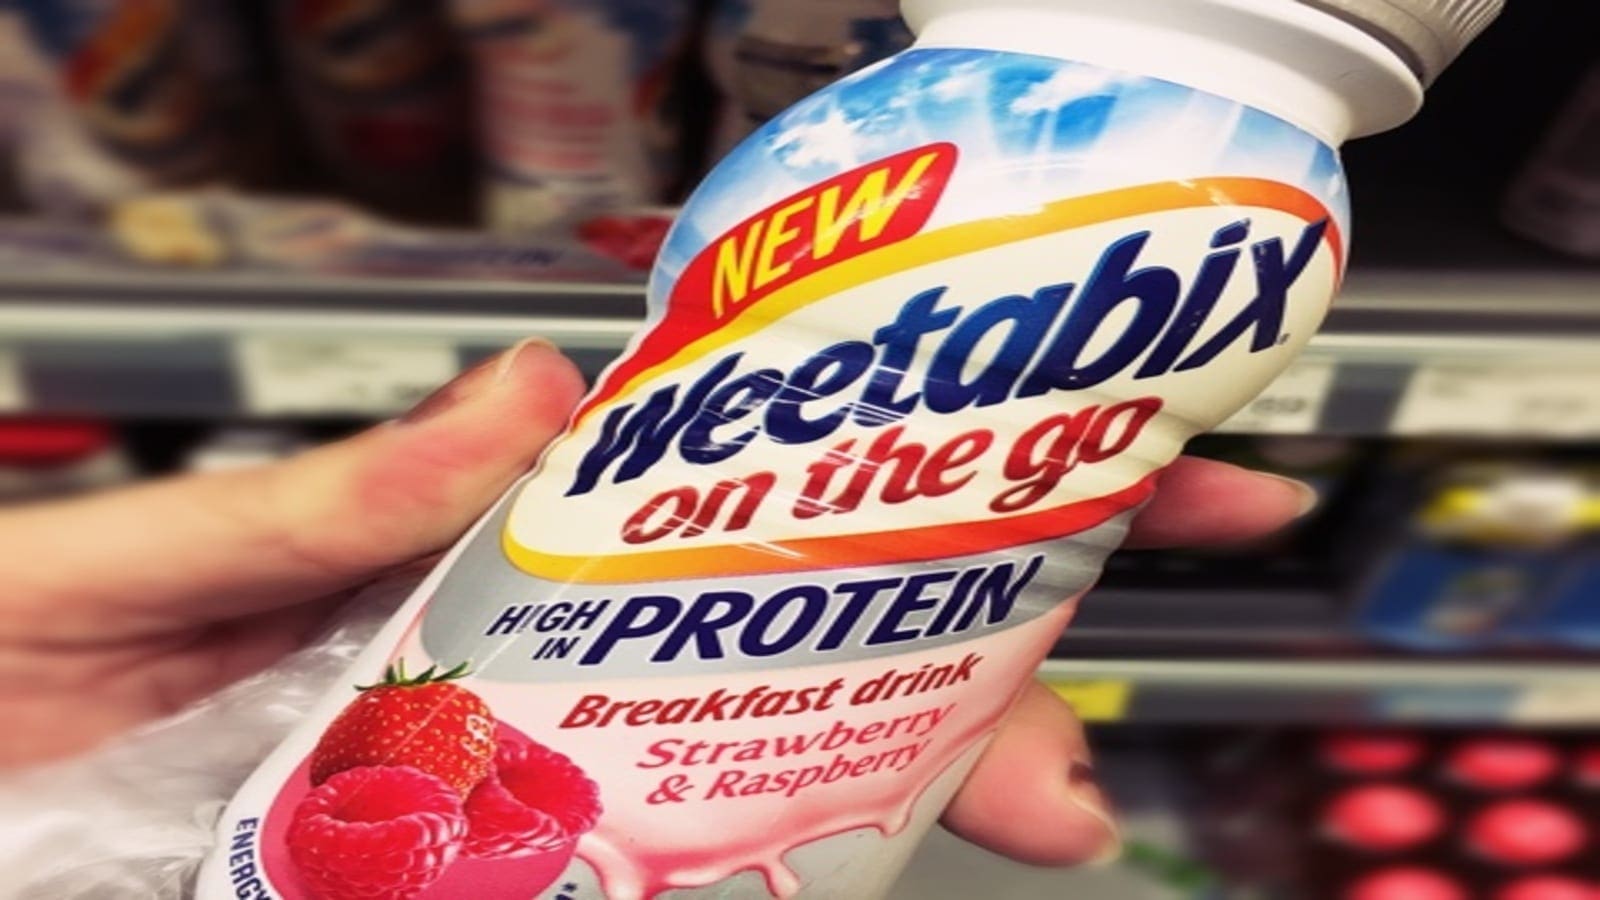 Weetabix launches new 100% recyclable bottles for its Weetabix On the Go range